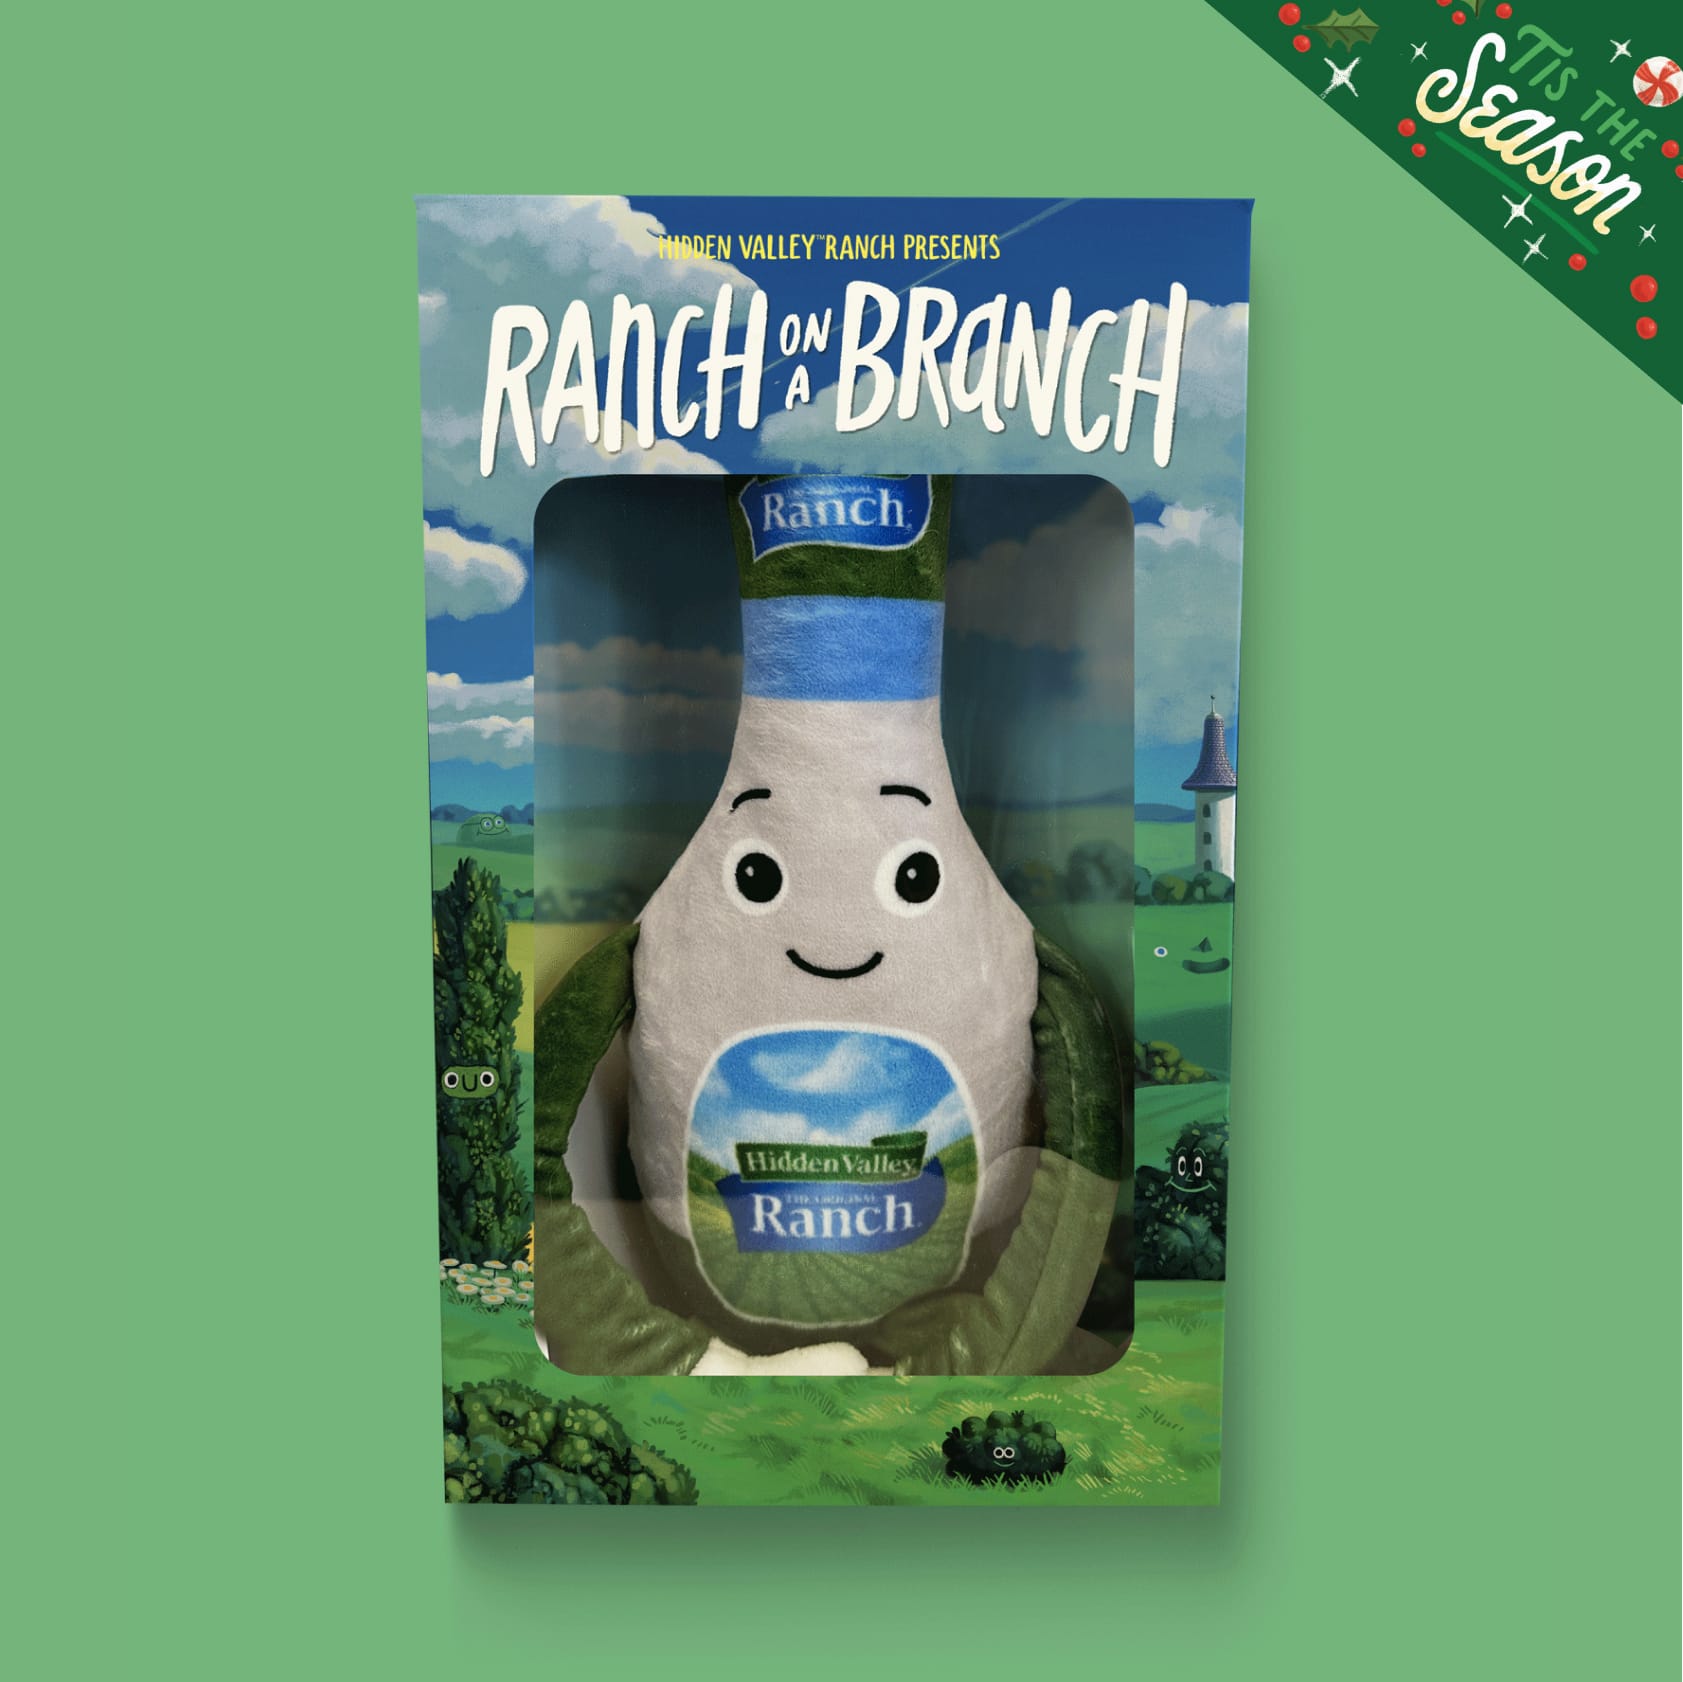 Ranch on a Branch Limited Edition Box Set | Hidden Valley® Ranch